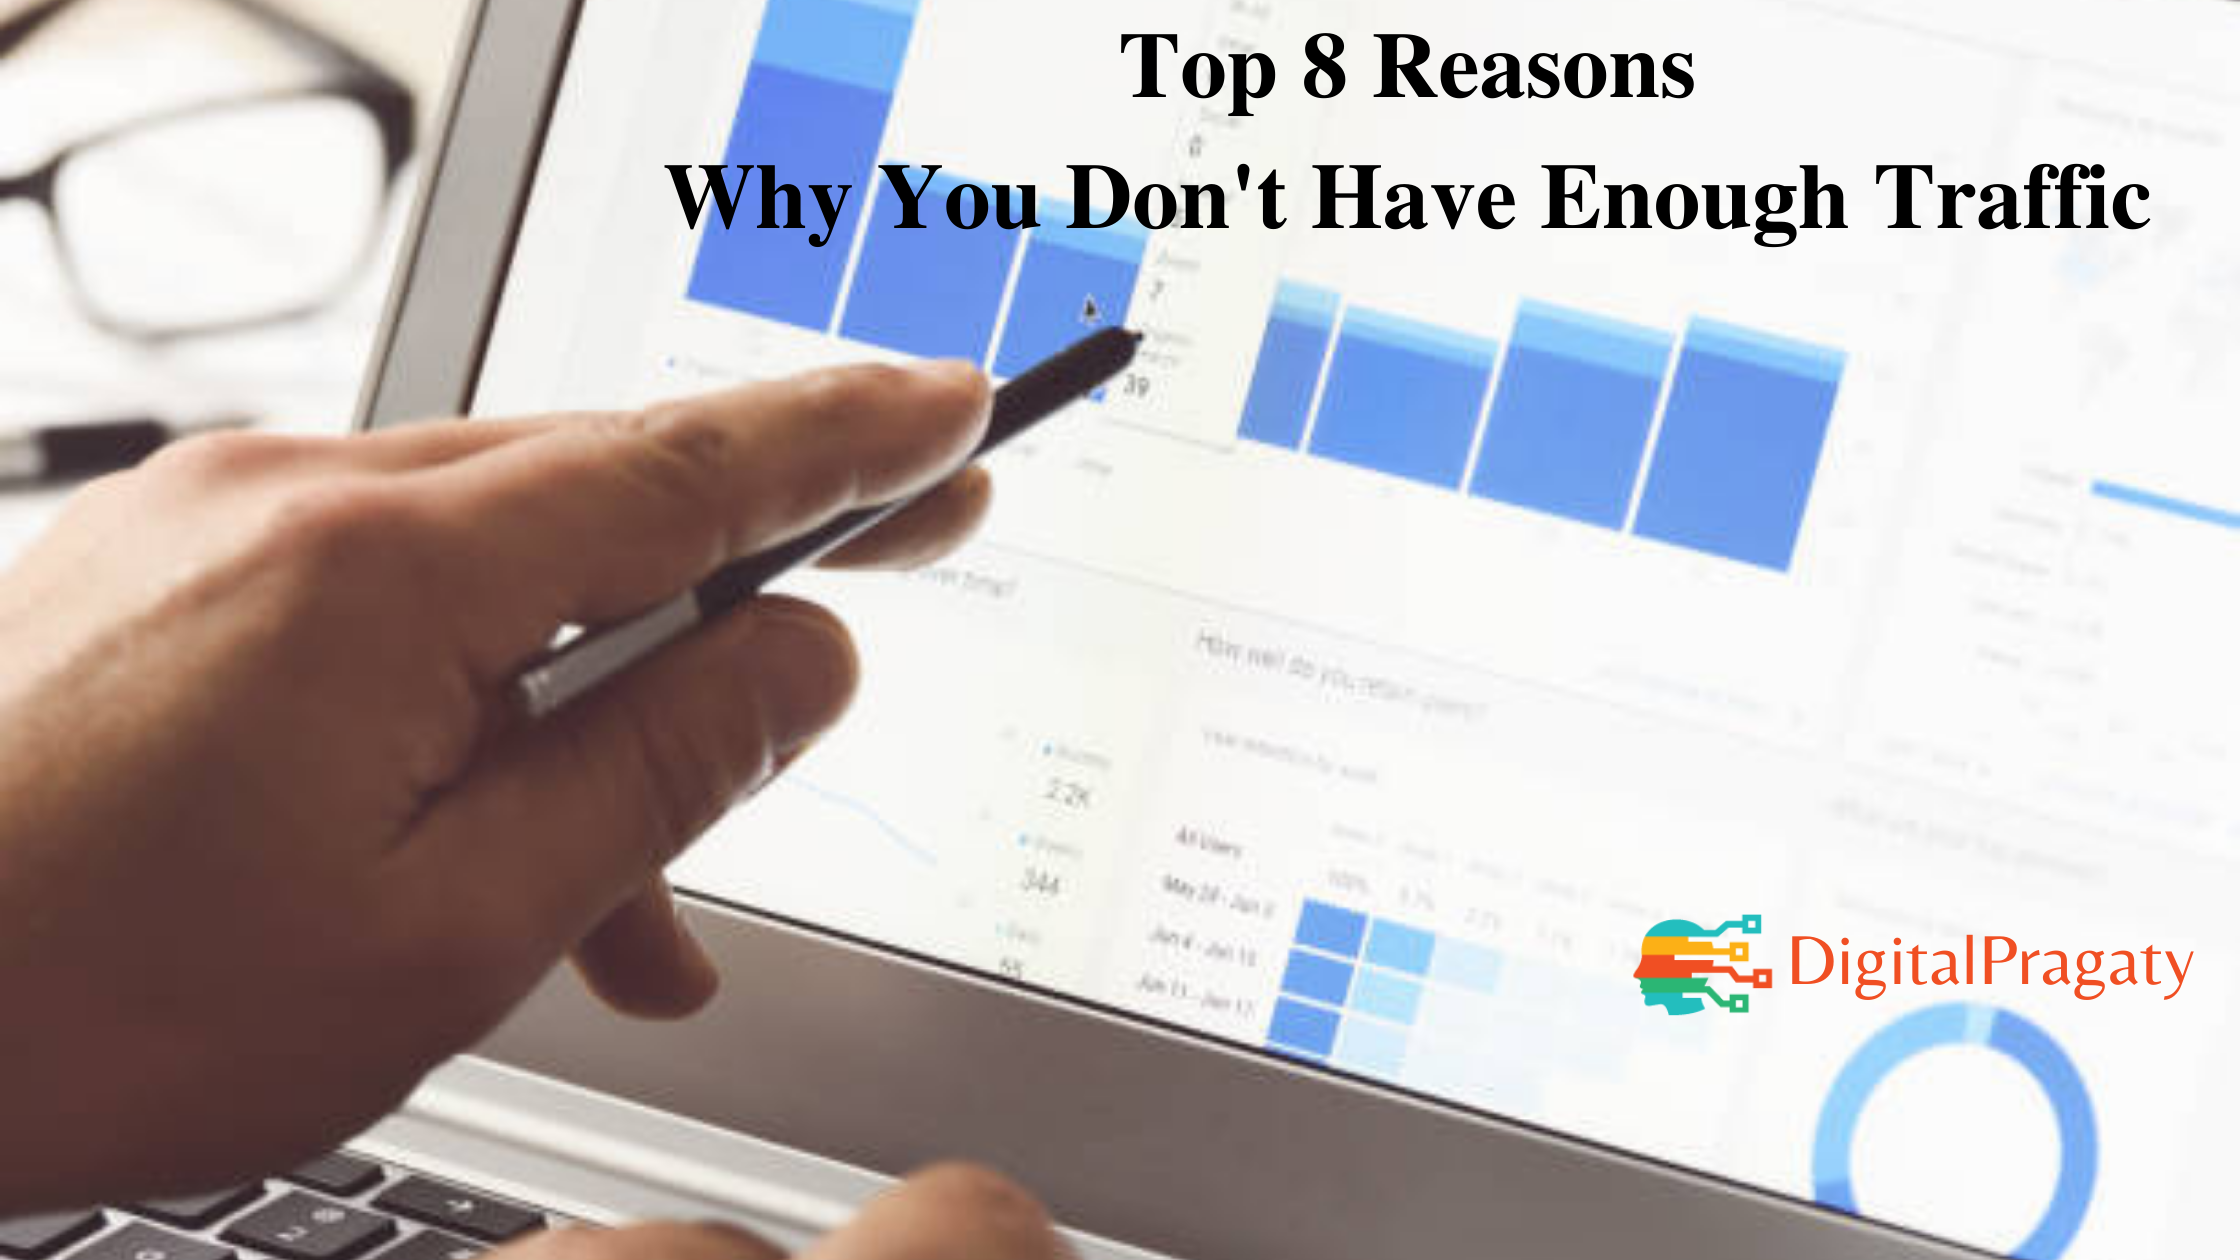 8 Reasons Why You Don’t Have Enough Traffic